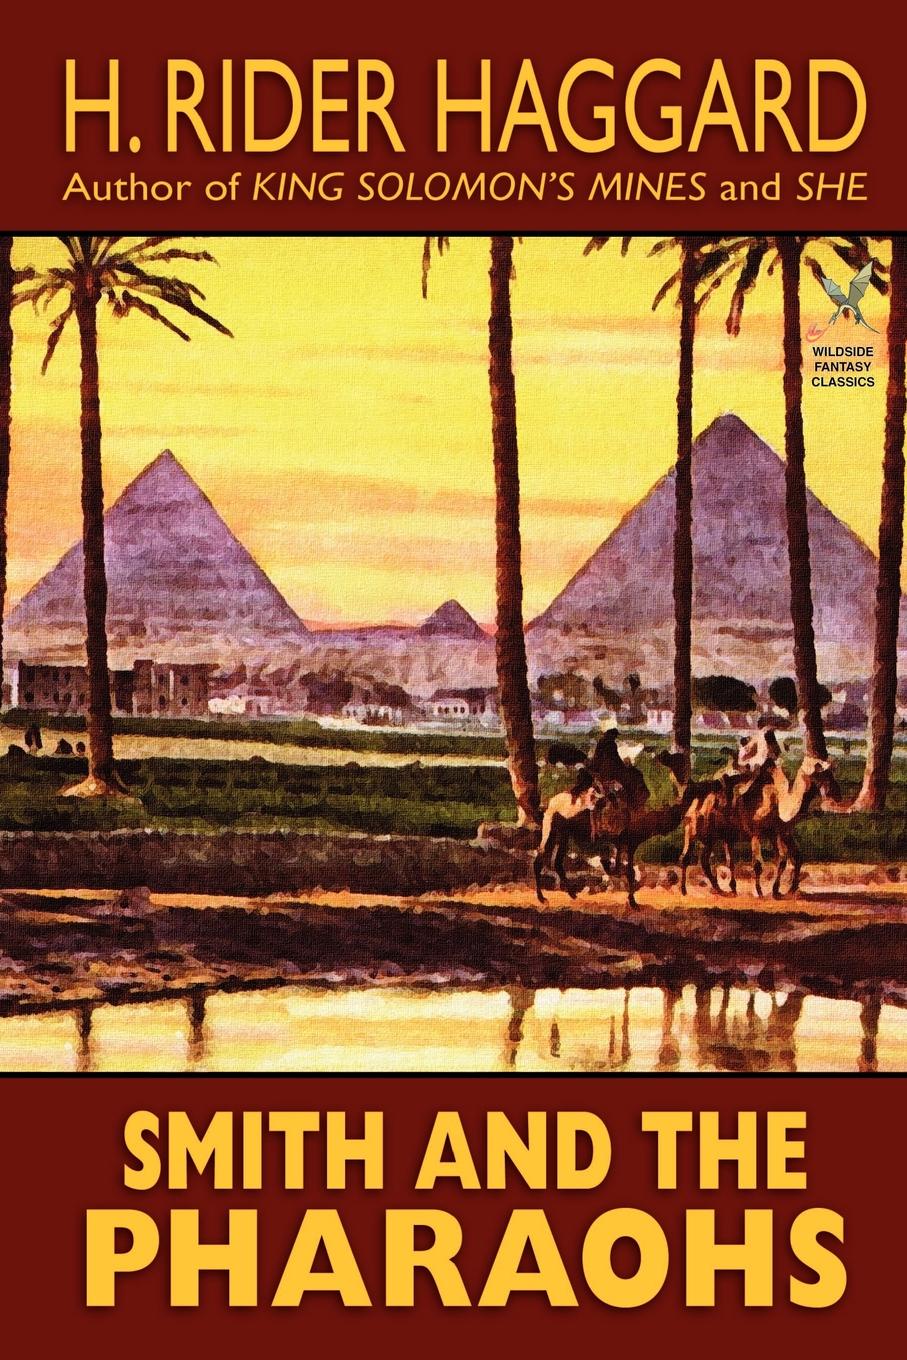 H. Rider Haggard Smith and the Pharaohs and Other Tales